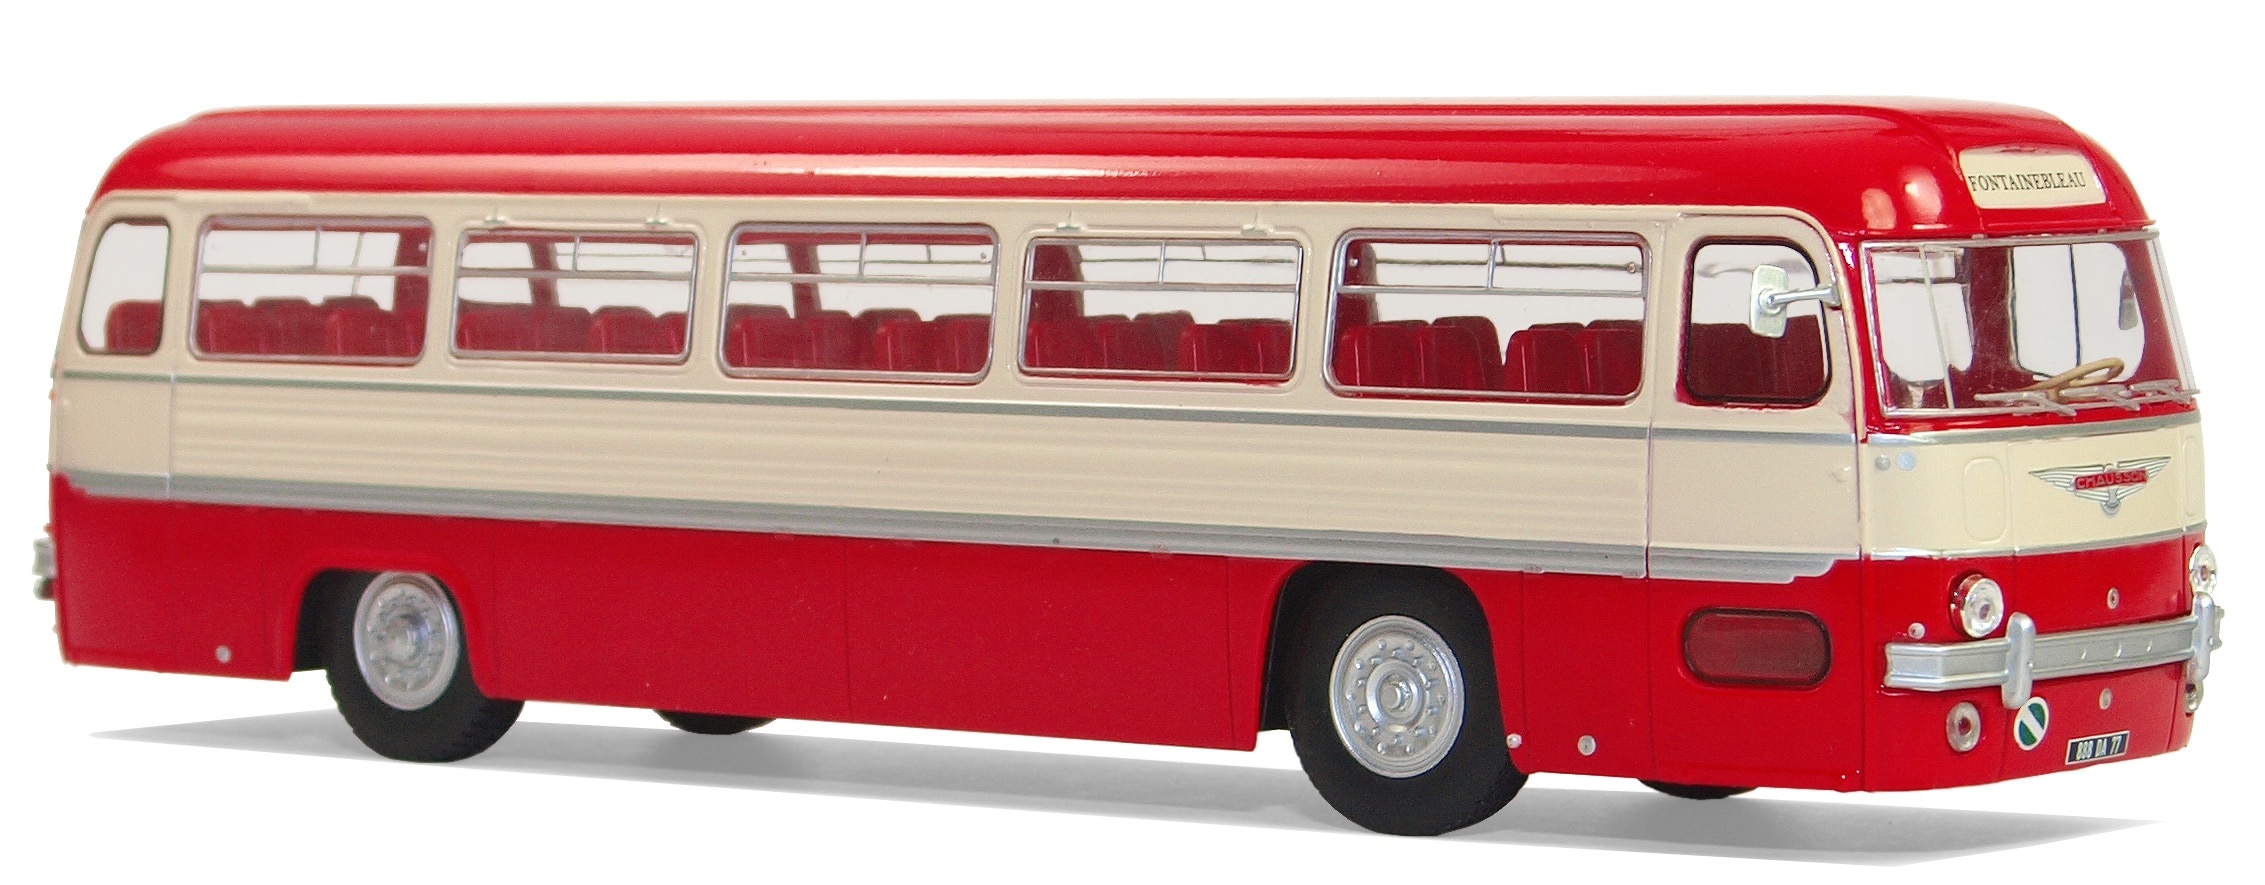 red and beige bus